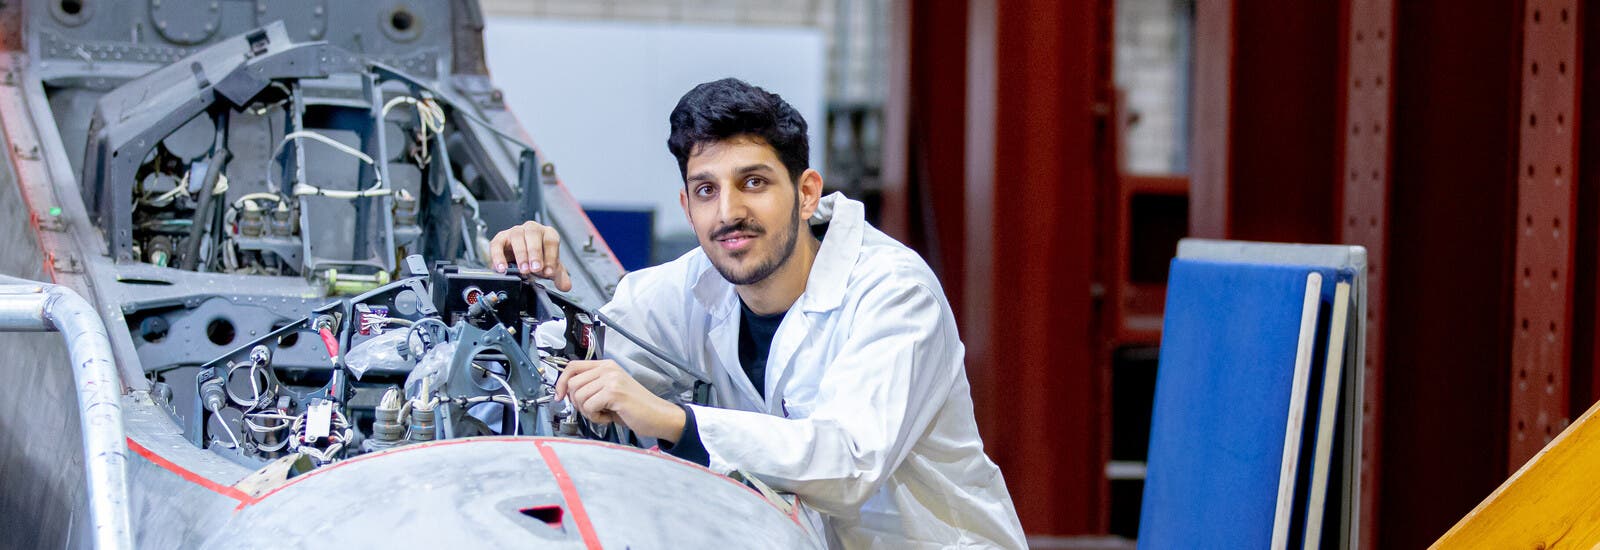 Engineering student in a lab coat working on an engine.